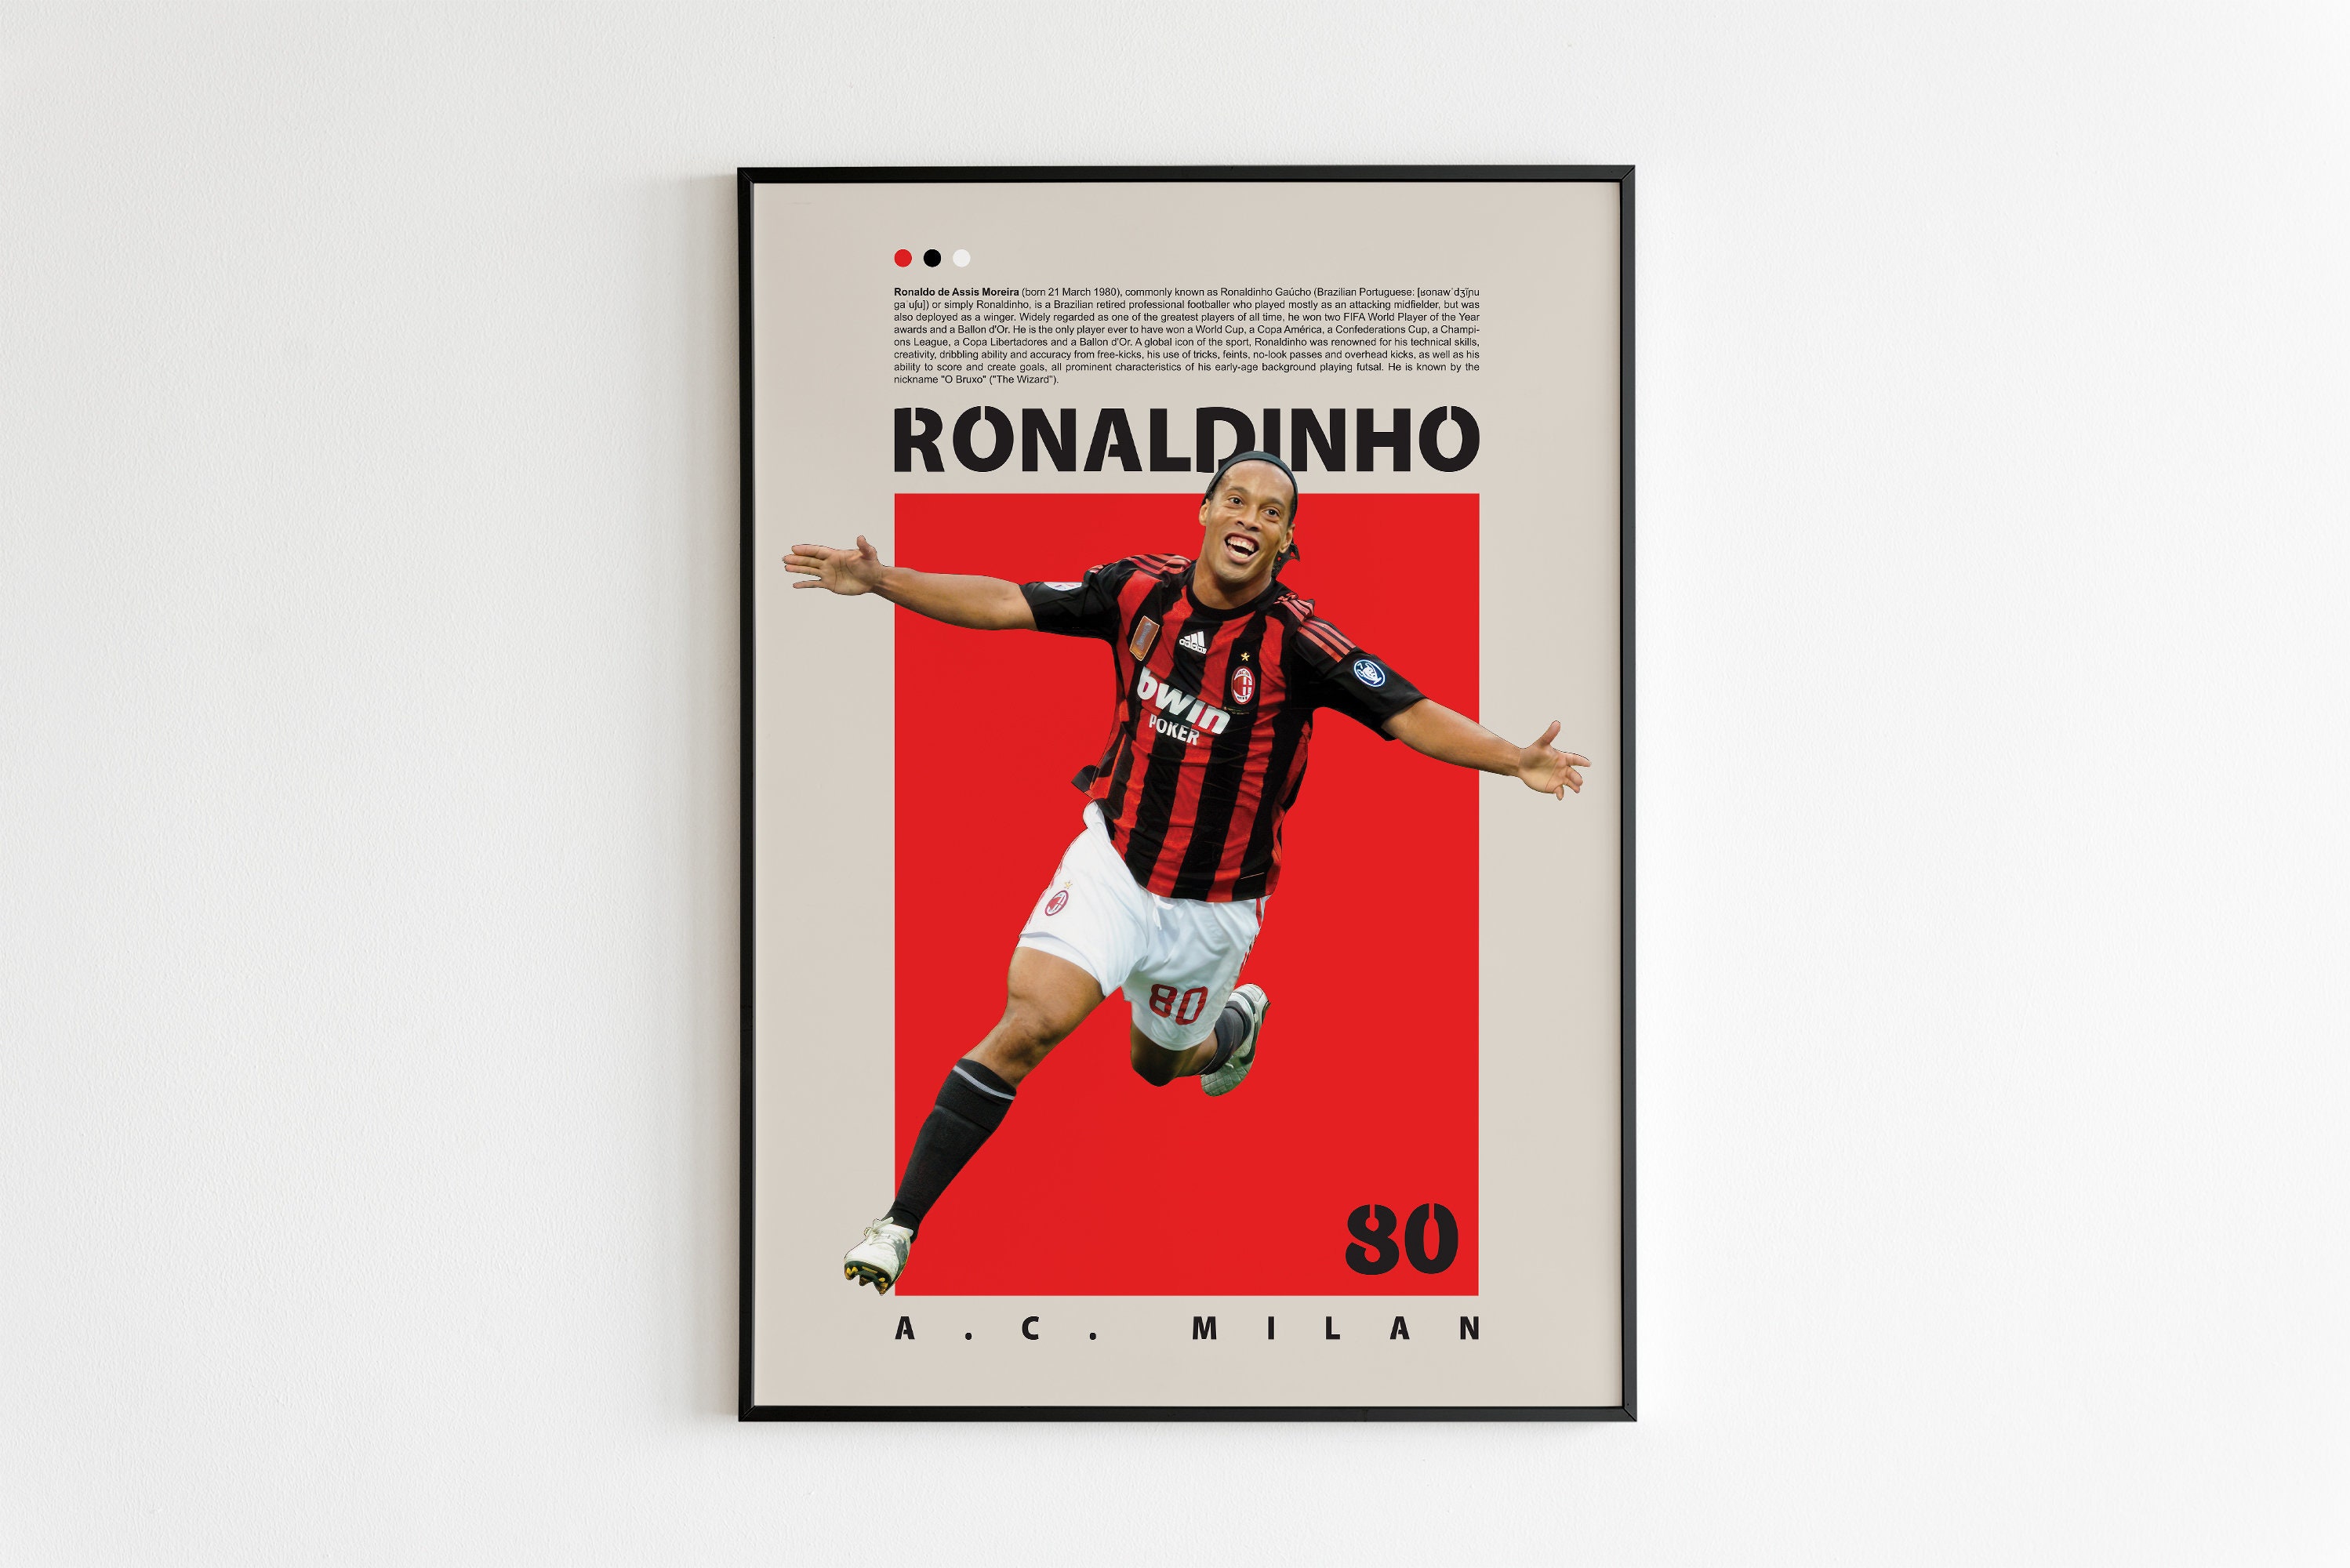 Football Star Ronaldinho GaúCho Poster Pictures Wall Art Canvas 3 Panels  European Clubs Canvas Painting Soccer Player Artowrk Giclee Prints for Home